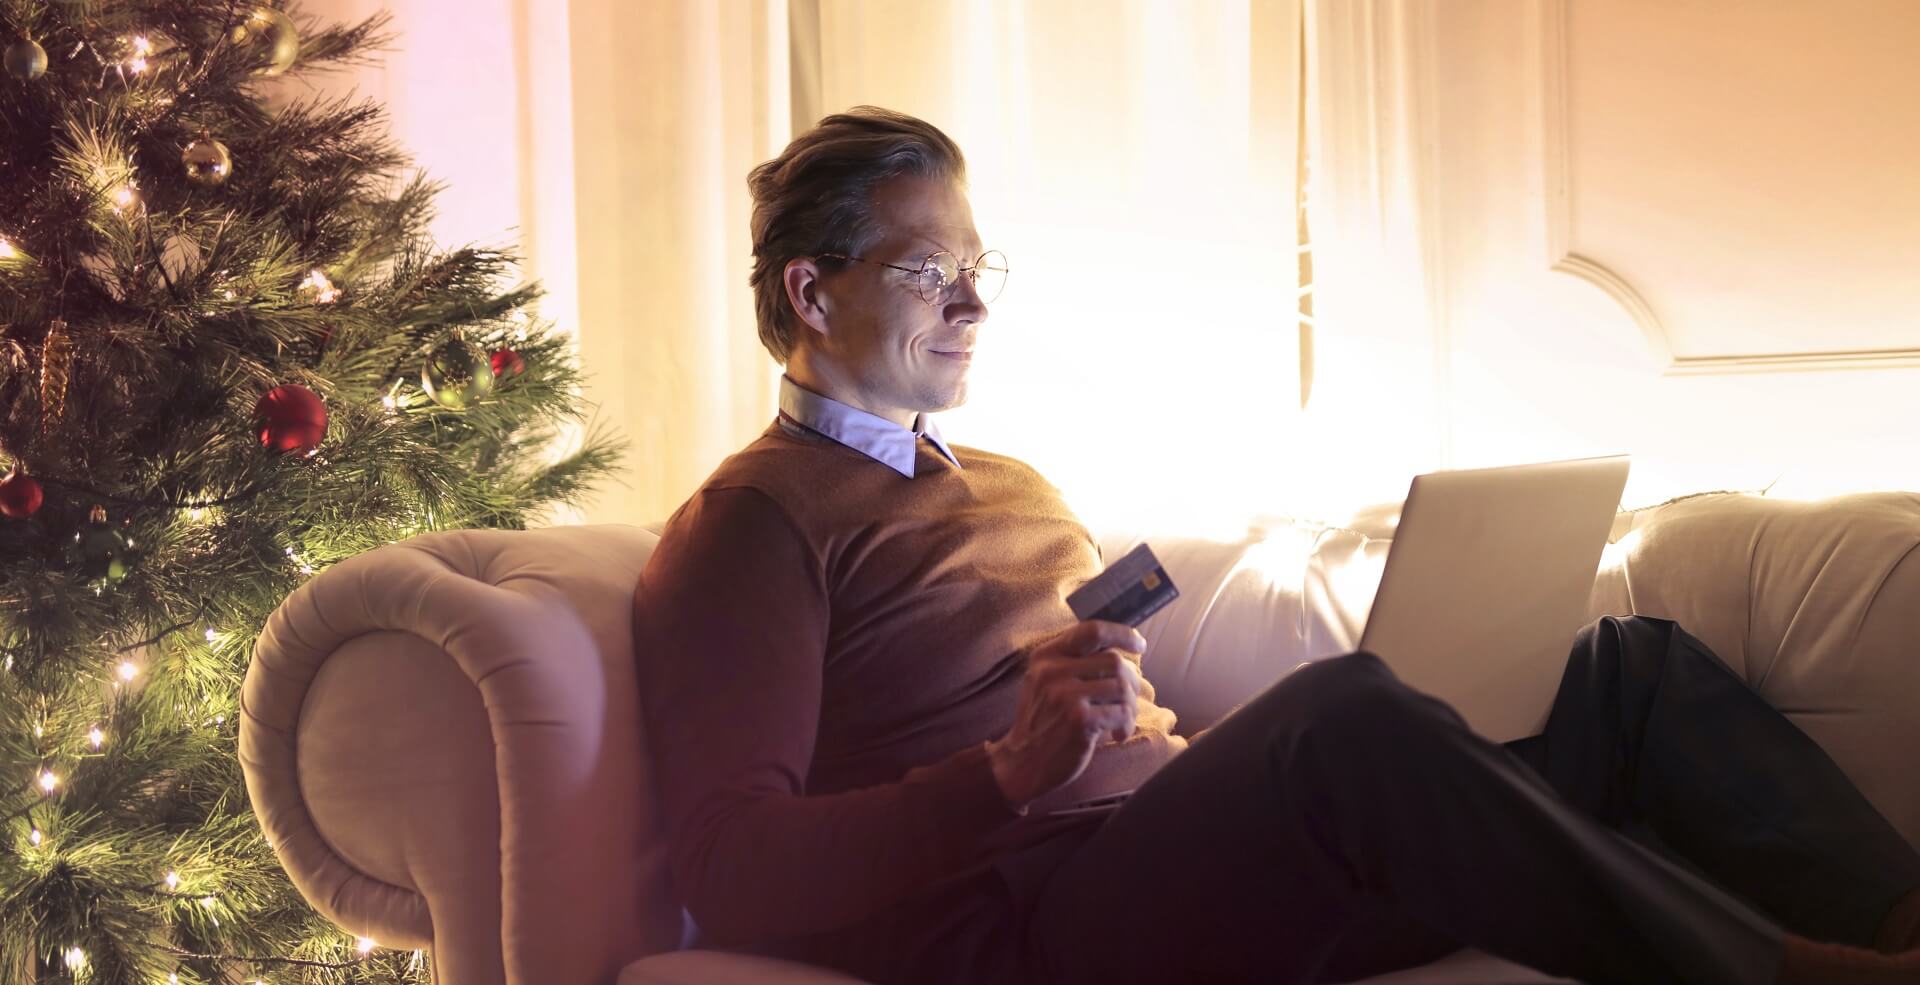 Man on sofa with credit card in hand presumably internet shopping